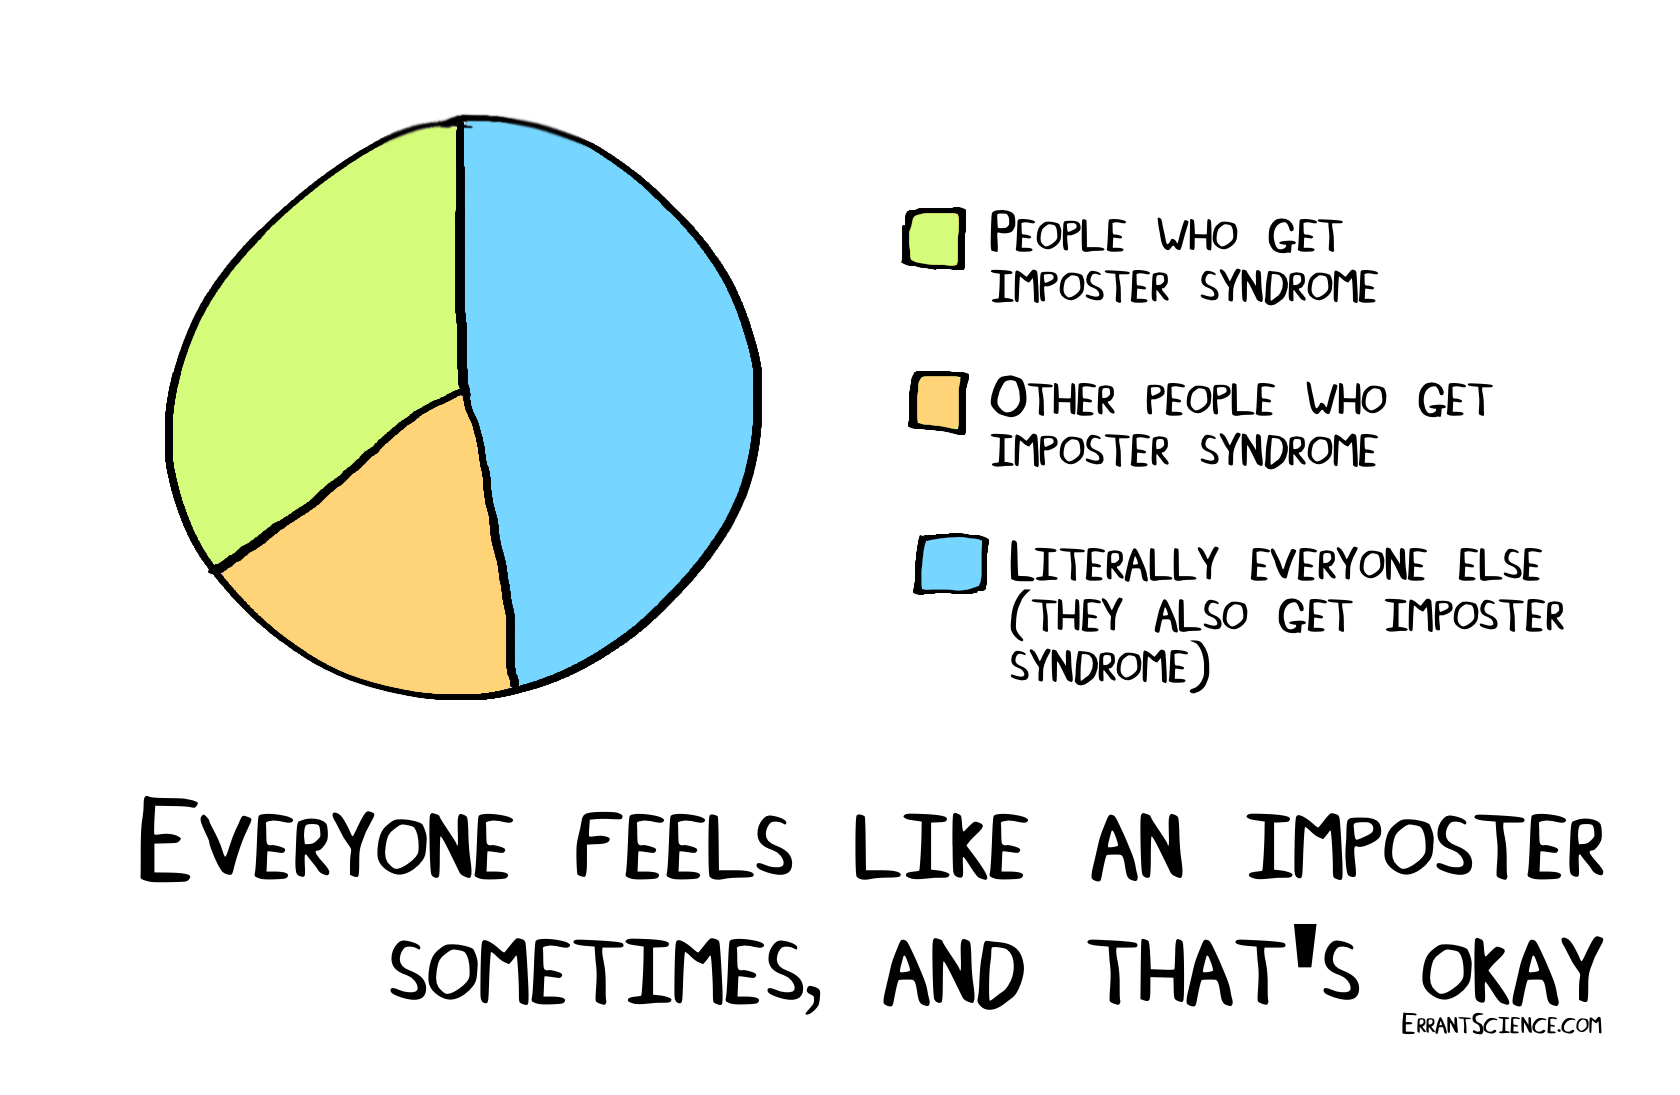 On the art of learning and the imposter syndrome